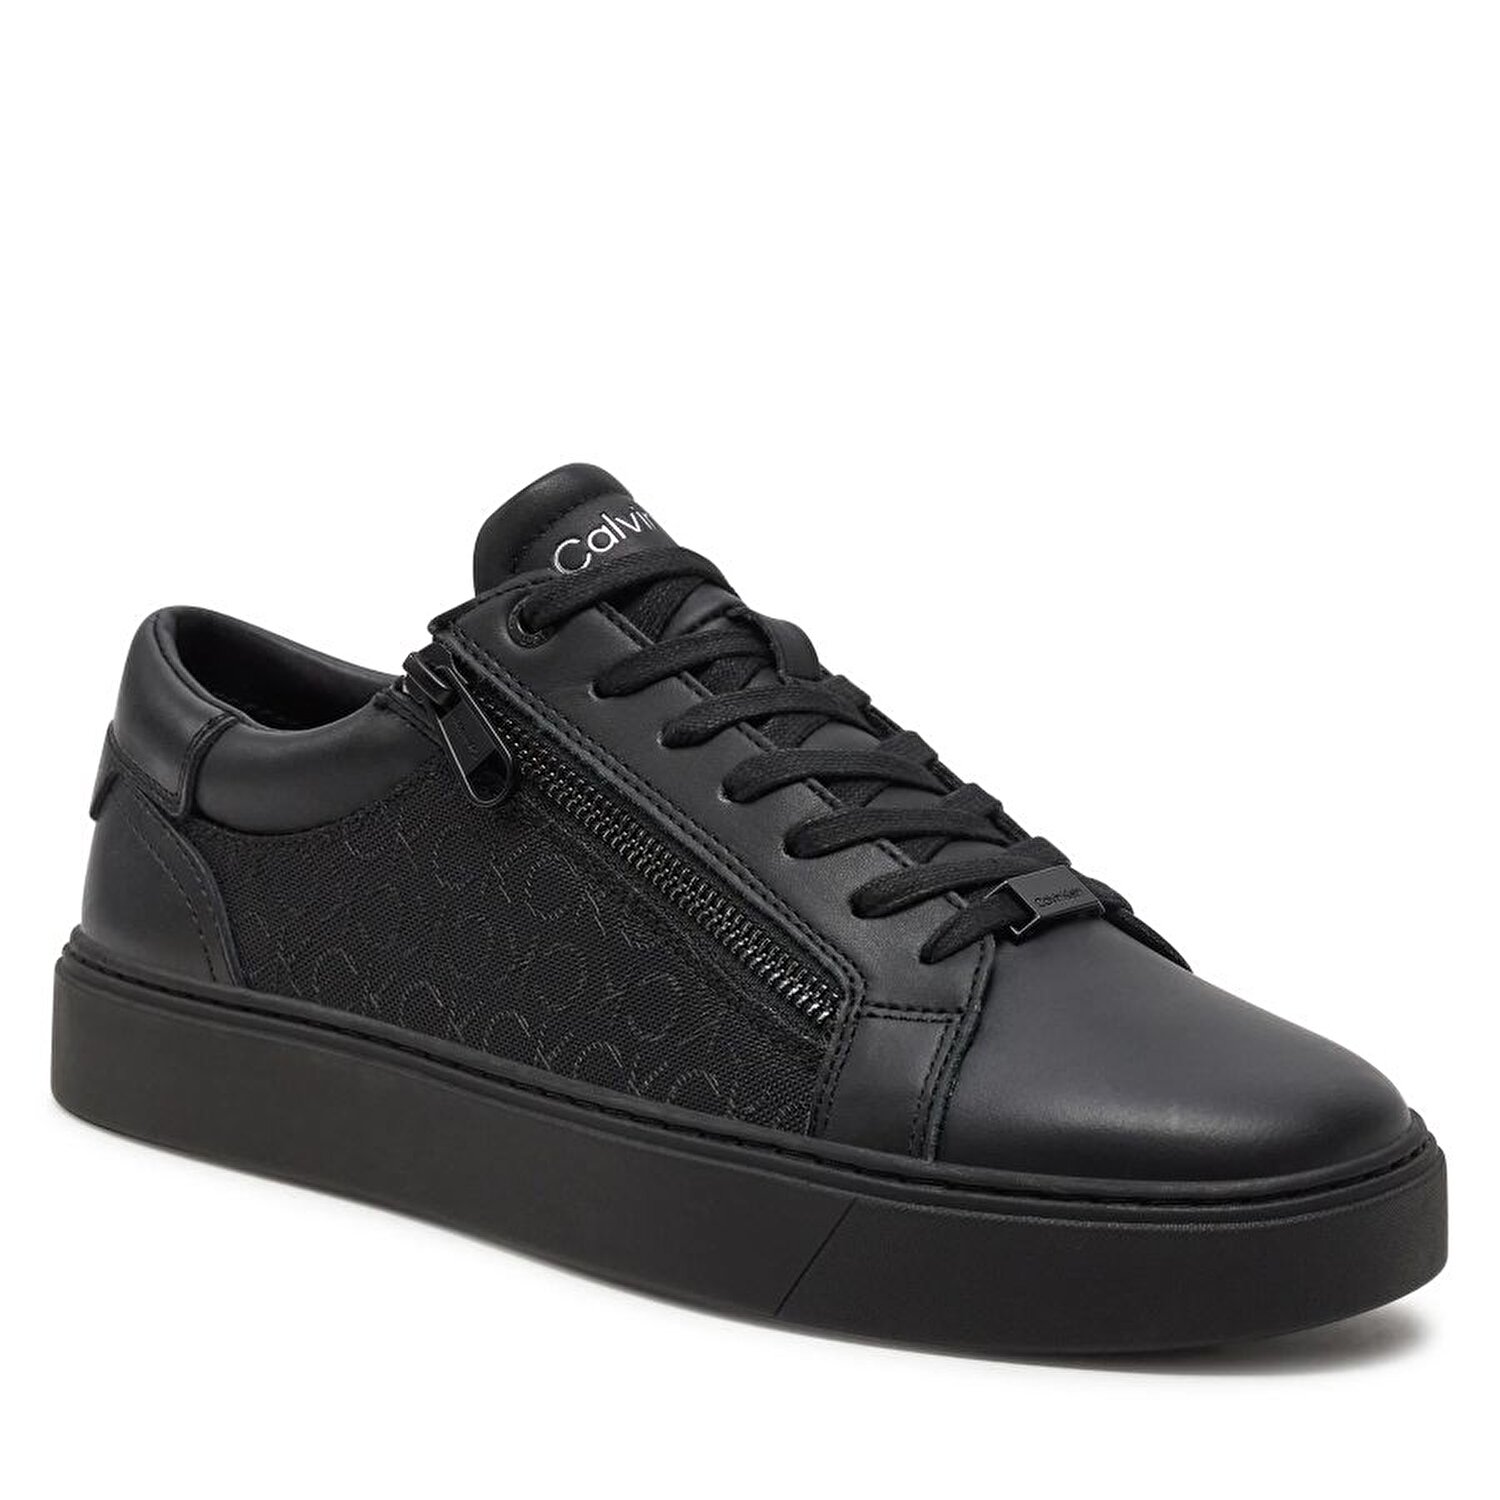 LOW TOP LACE UP W/ ZIP MONO